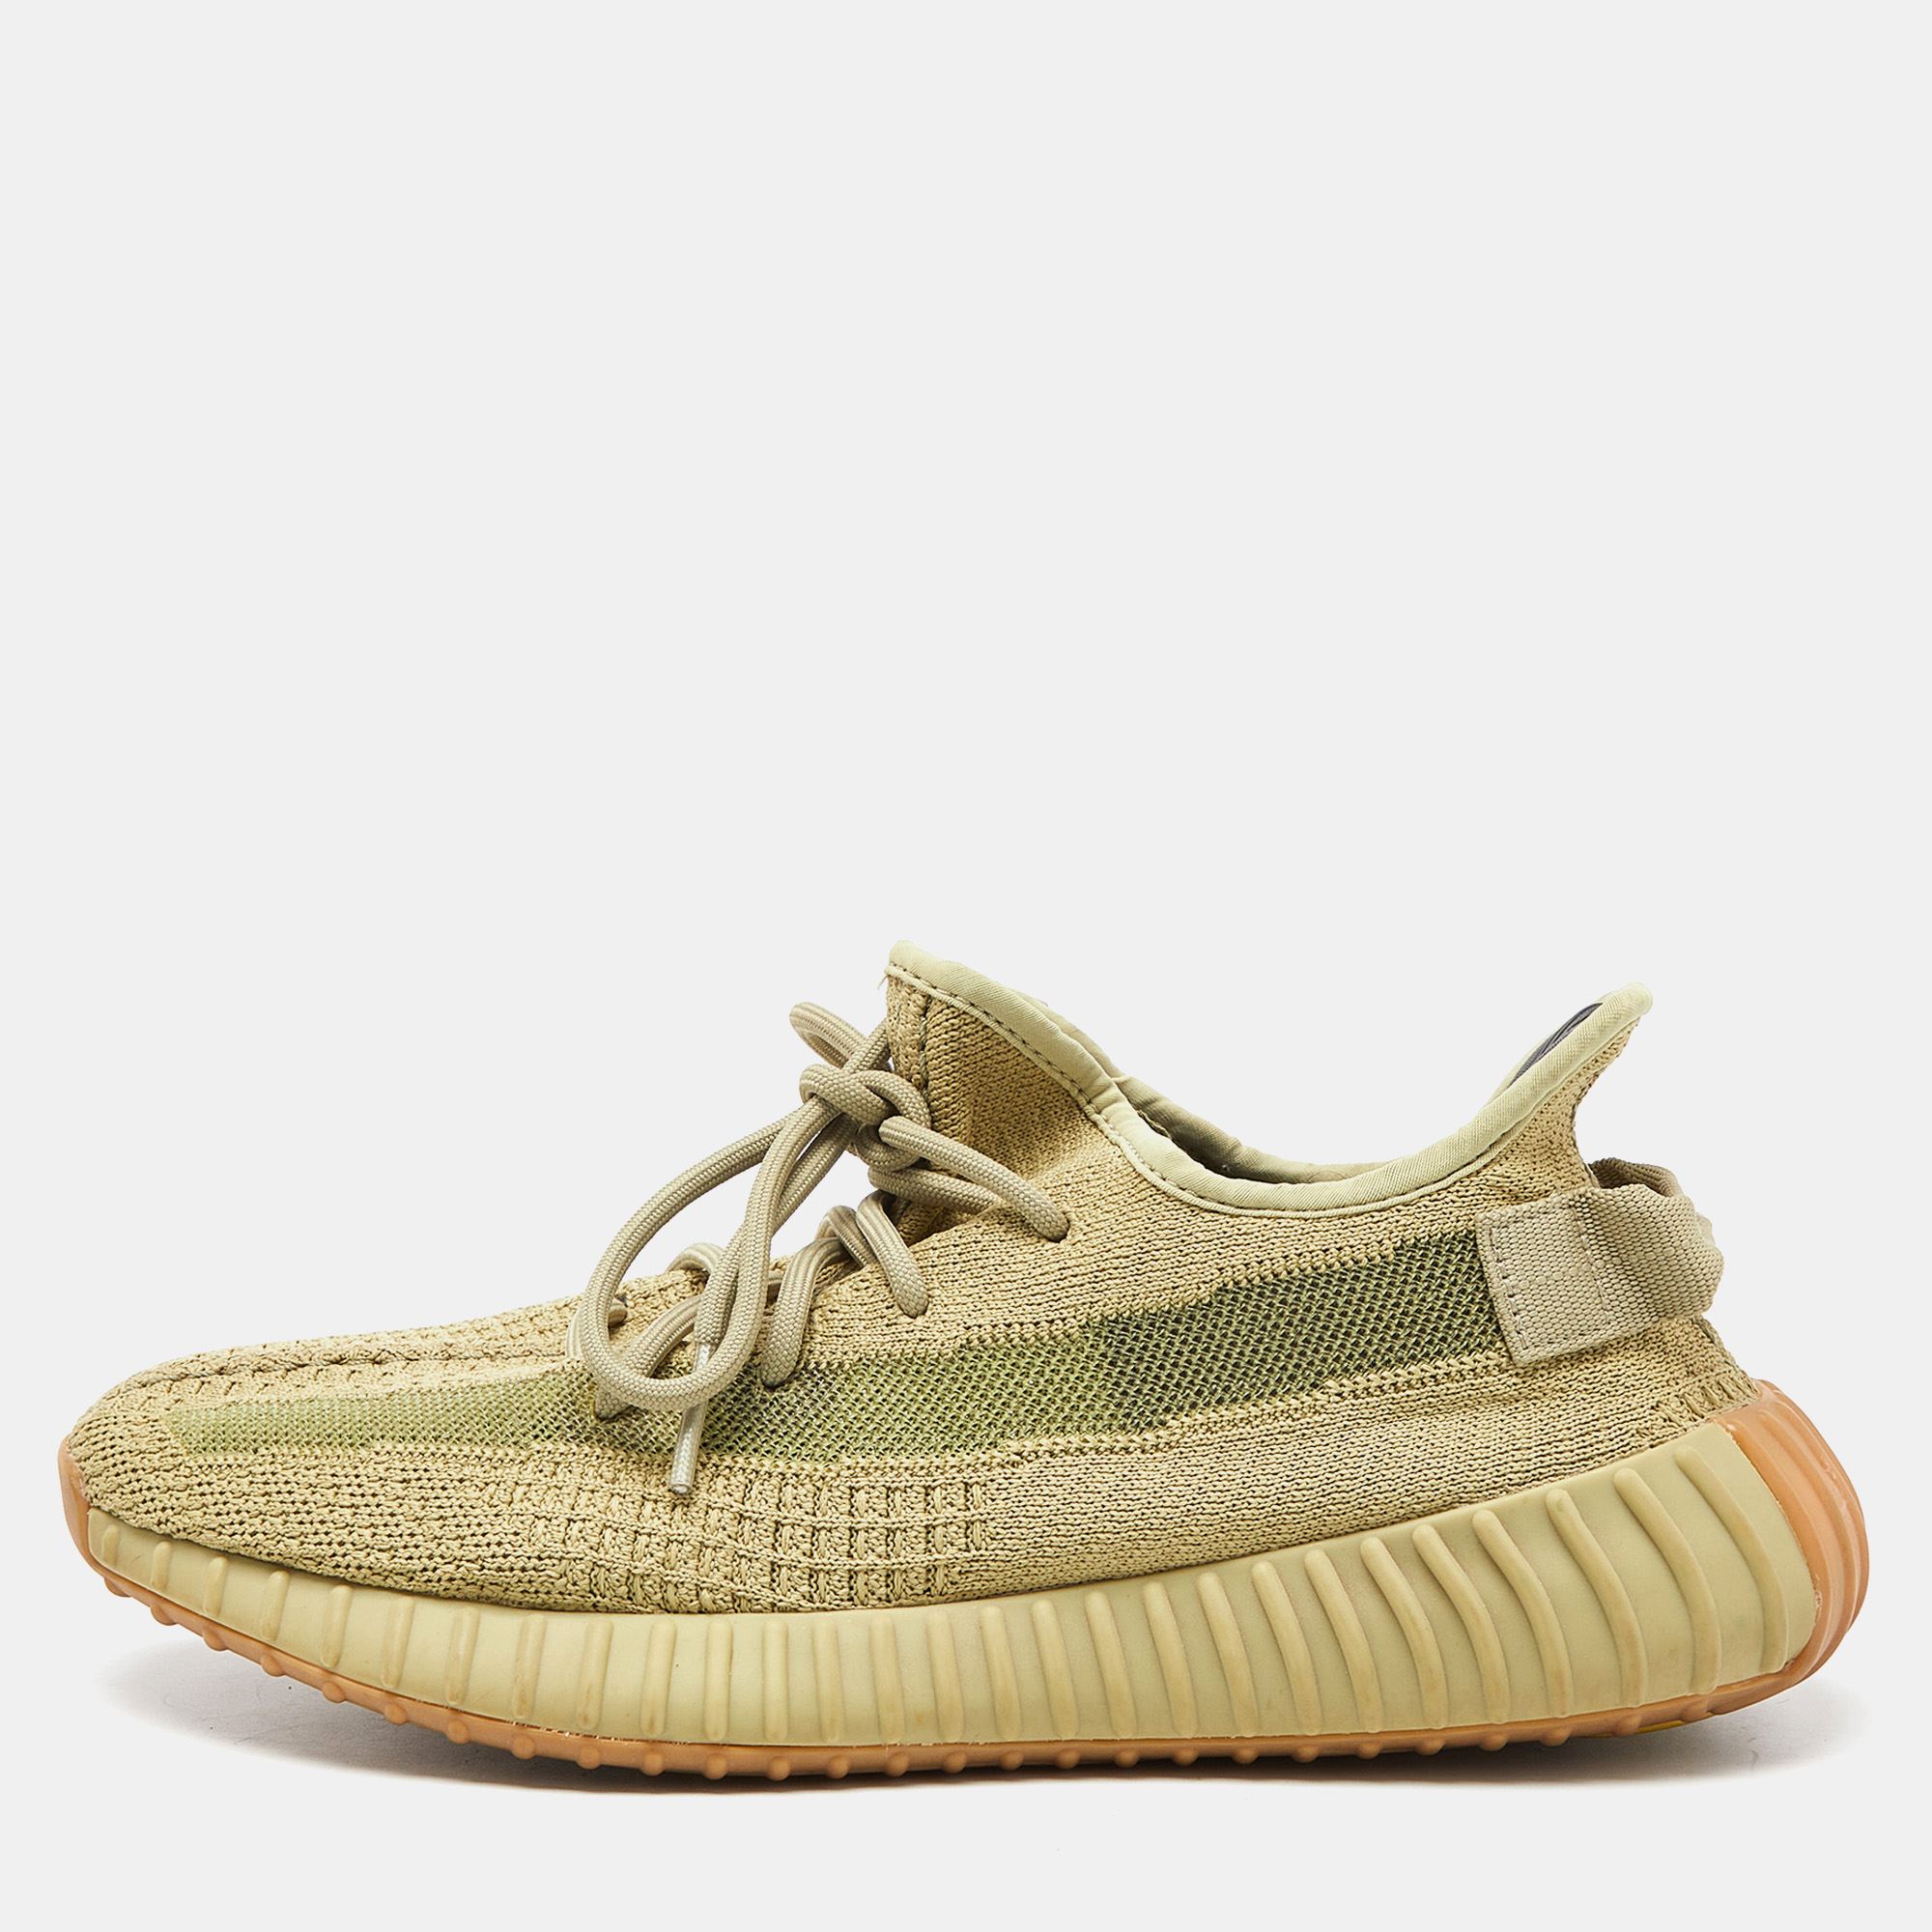 

Yeezy x Adidas Green Knit Fabric Boost 350 V2 Sulfur Sneakers Size